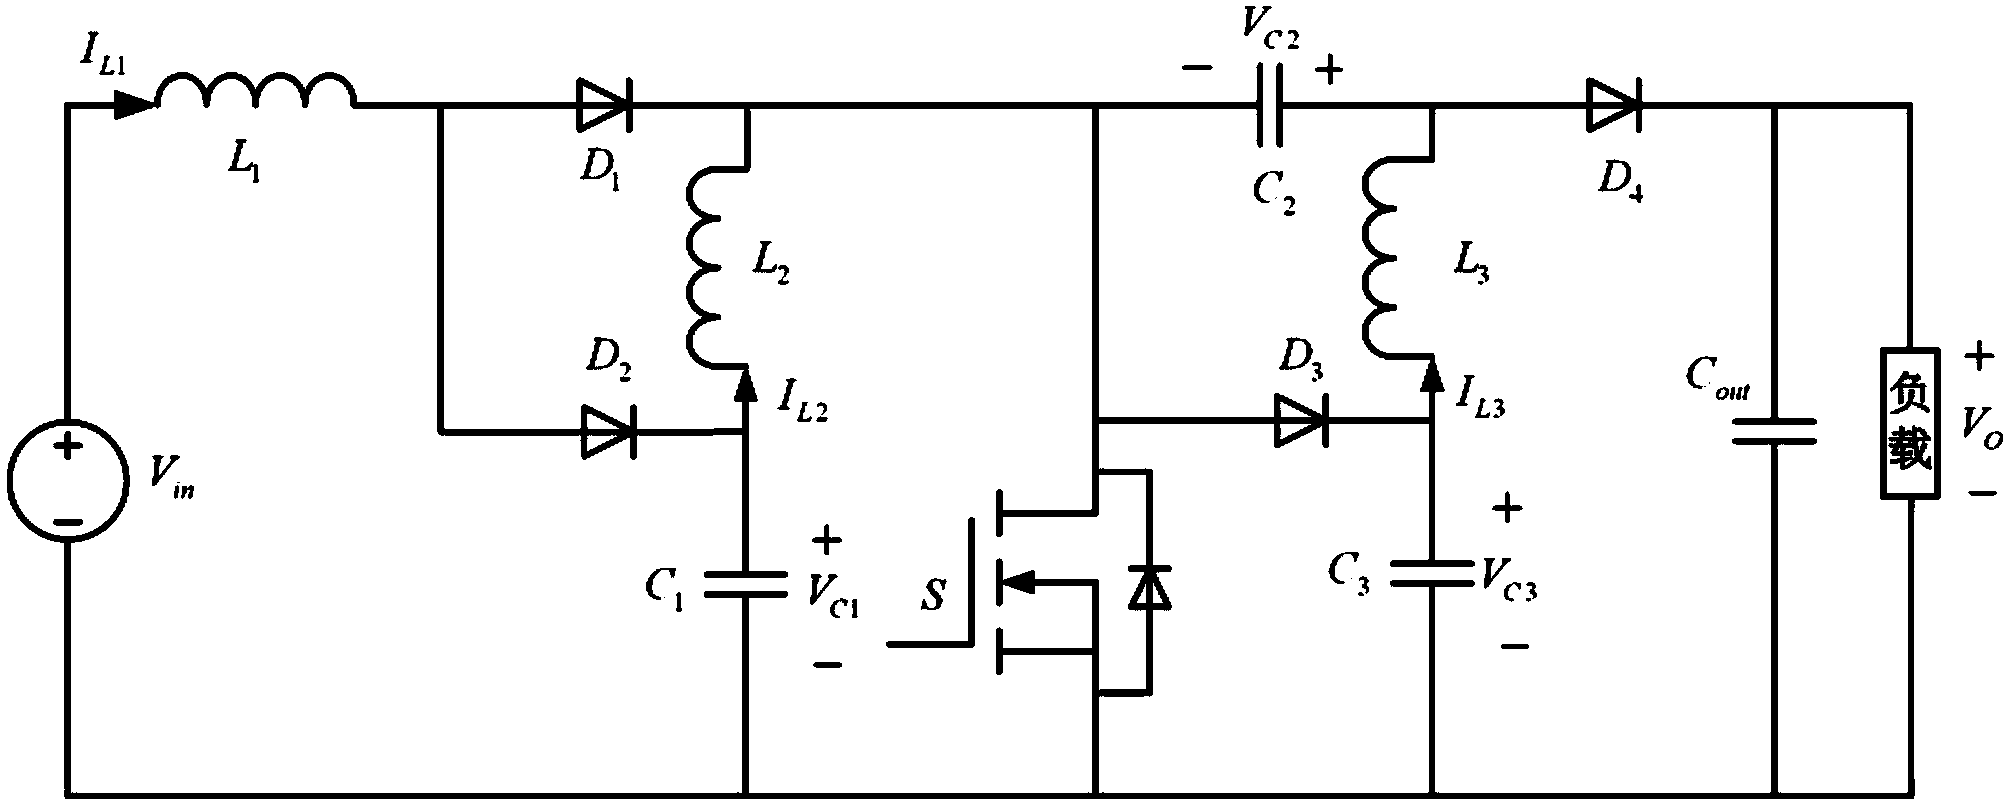 Single-switch high-gain boosting DC (direct current)/DC converter